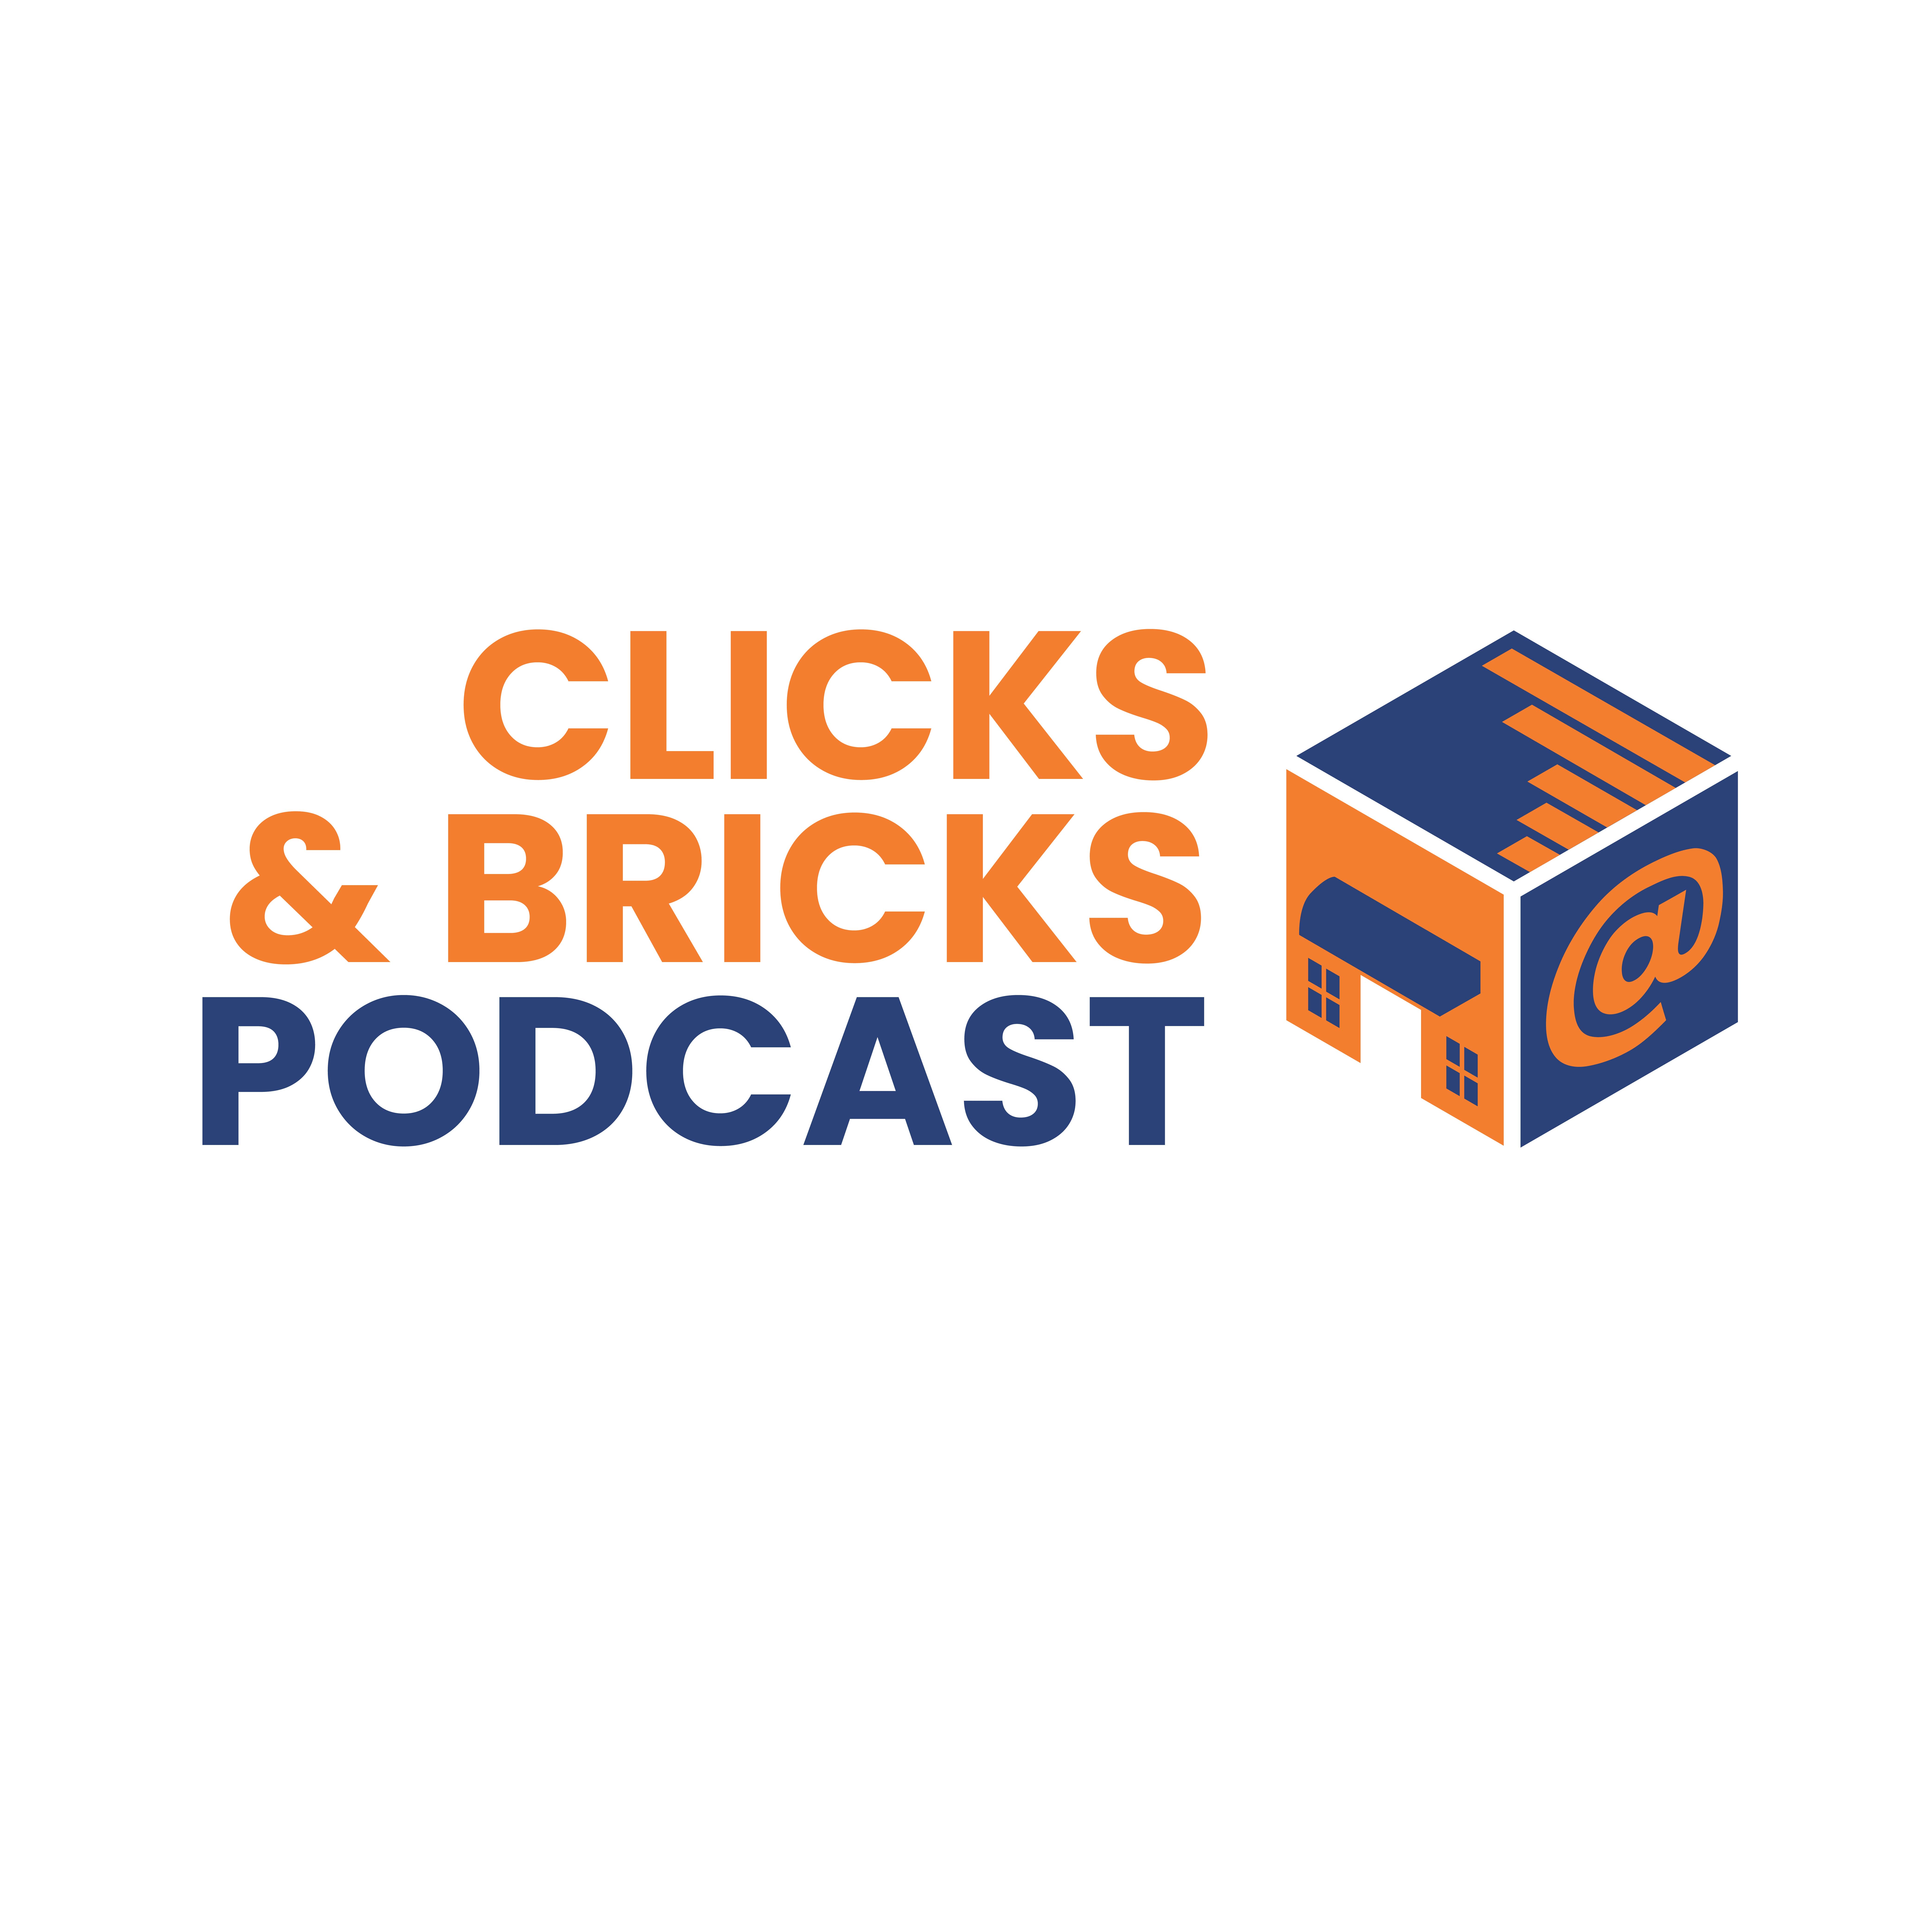 Clicks & Bricks Podcast Announces Interview with Julio Saiz, Founder & CEO of The Motor Chain